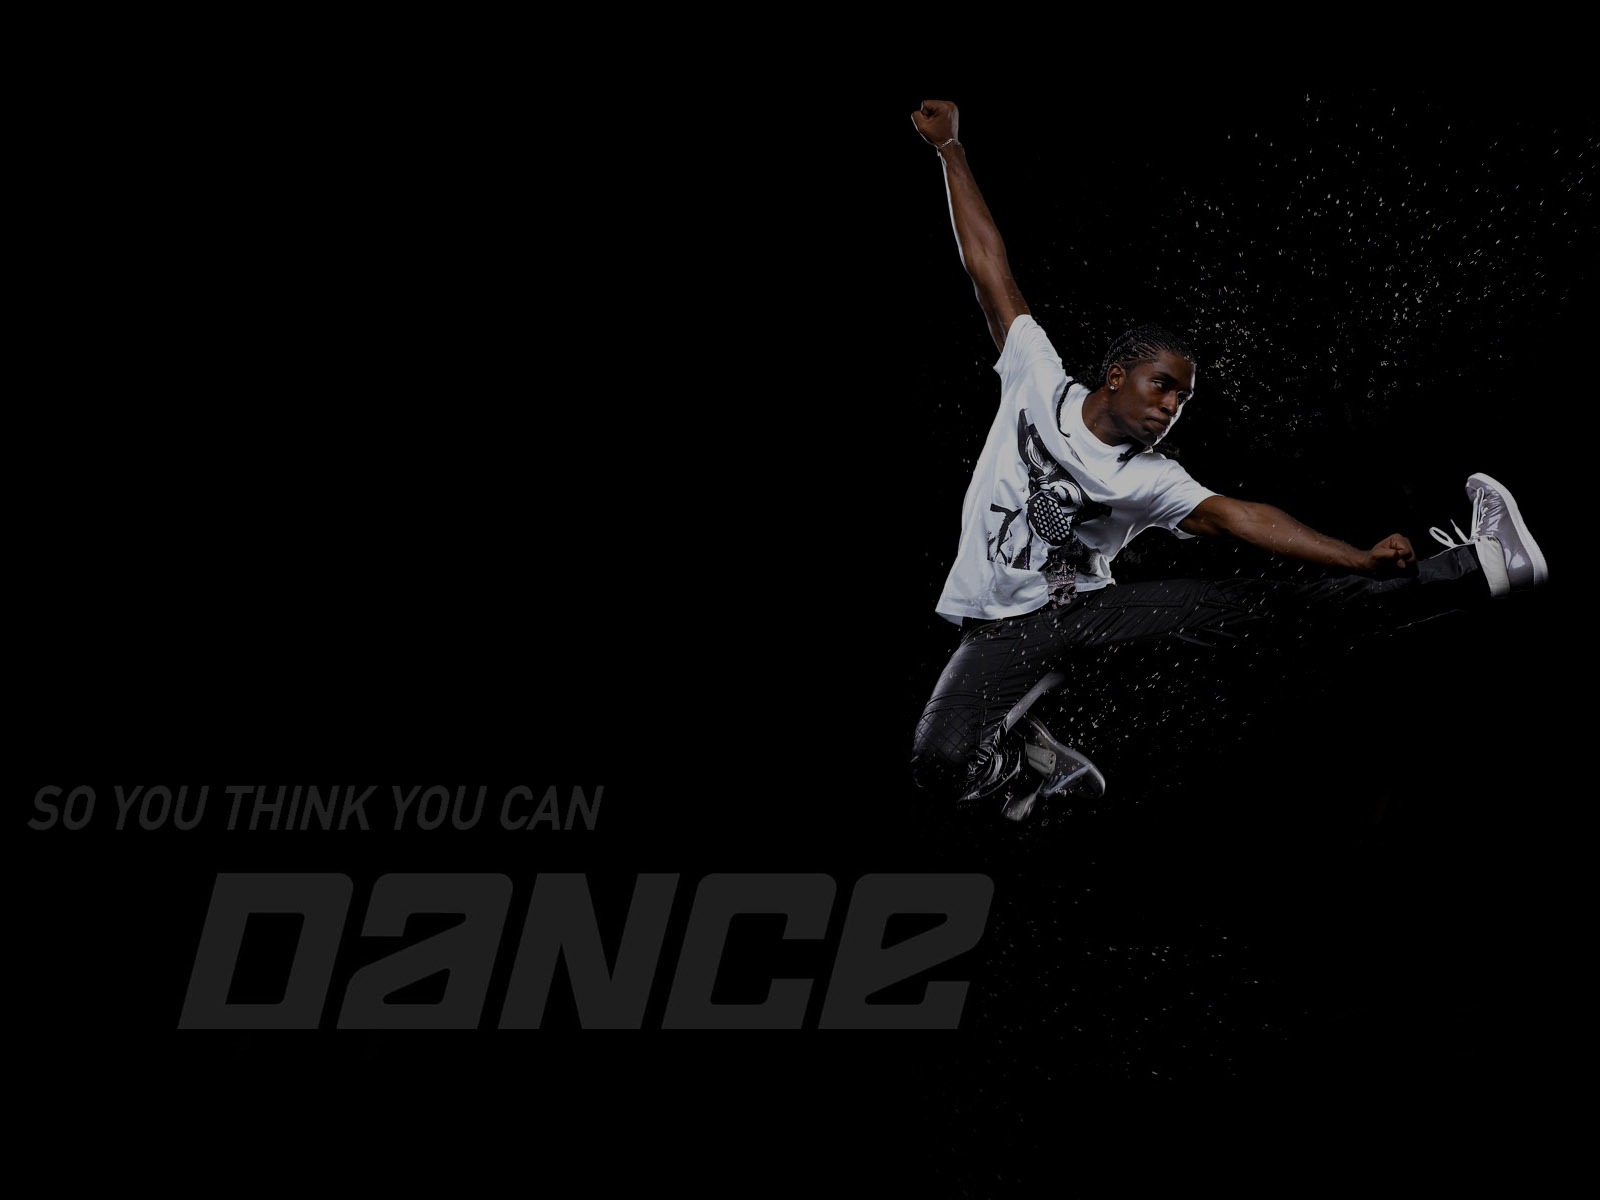 So You Think You Can Dance 舞林争霸 壁纸(二)4 - 1600x1200